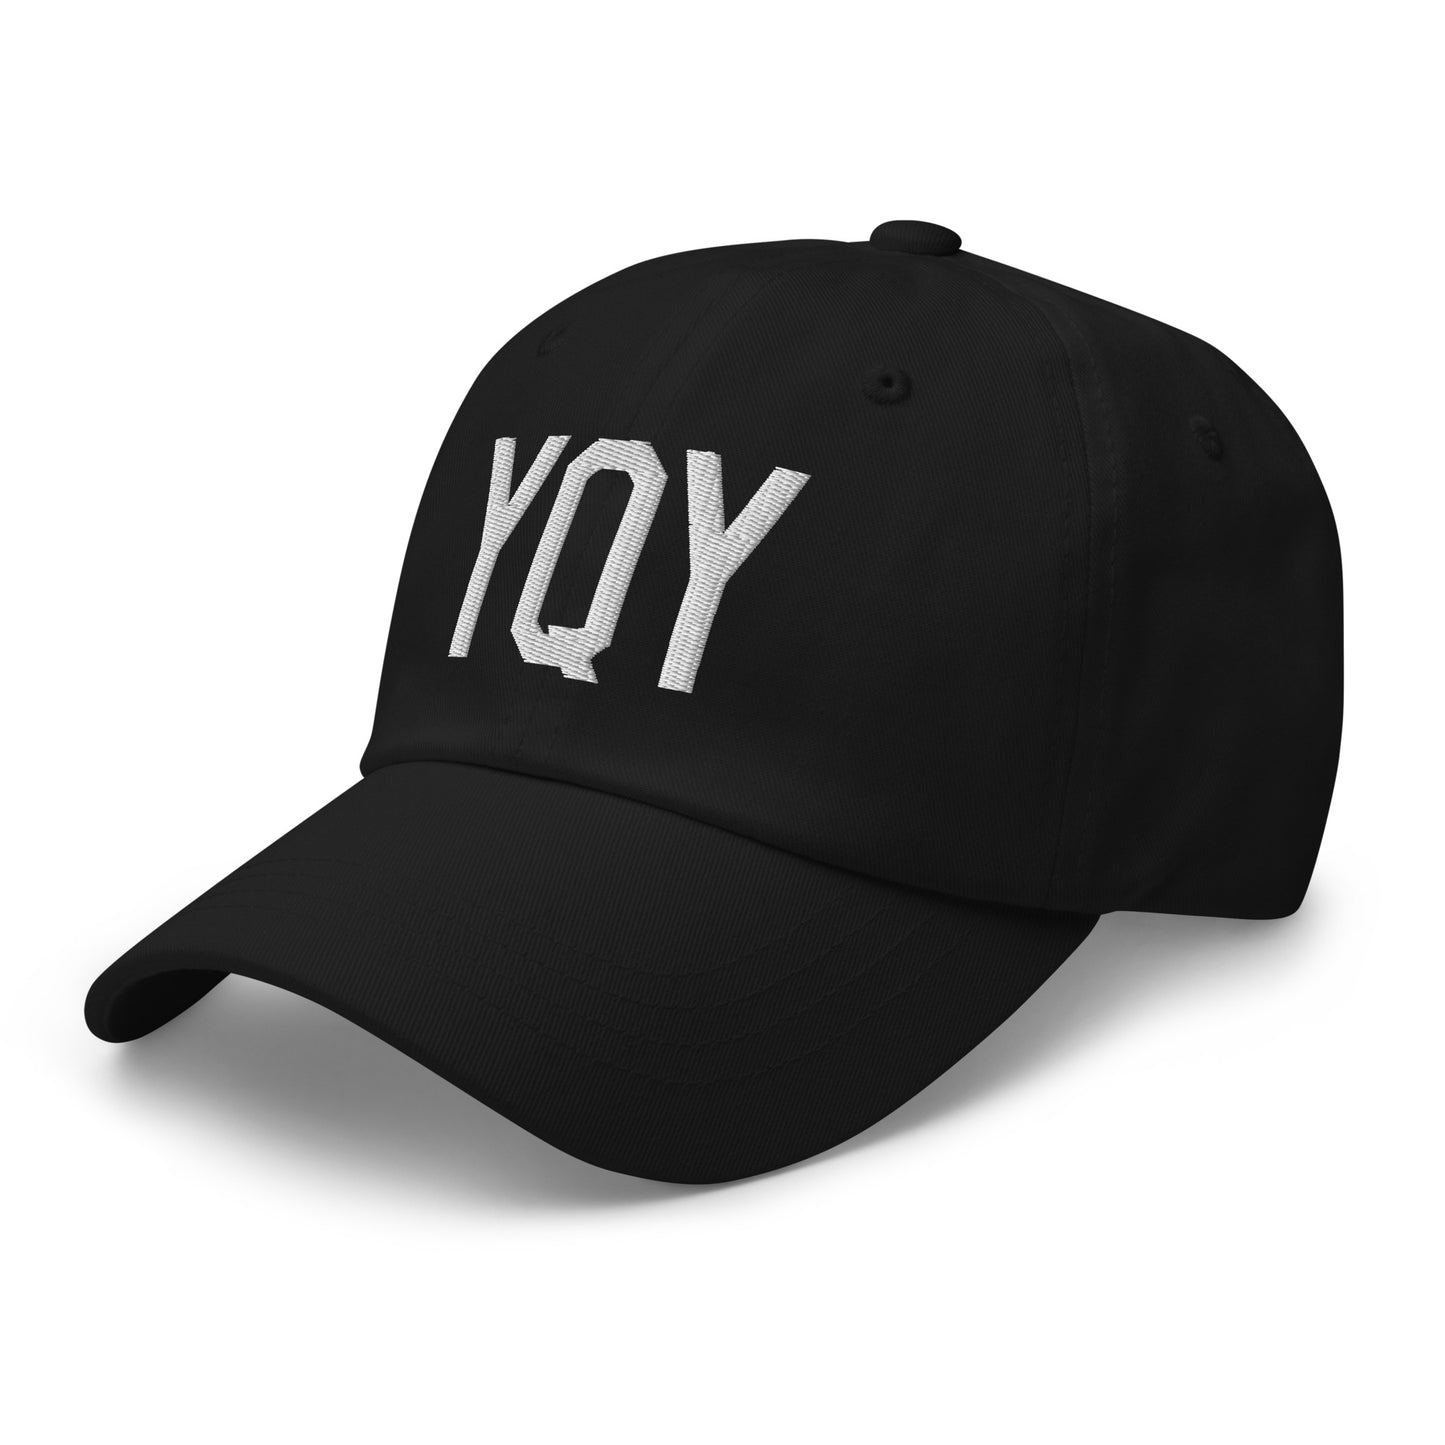 Airport Code Baseball Cap - White • YQY Sydney • YHM Designs - Image 01